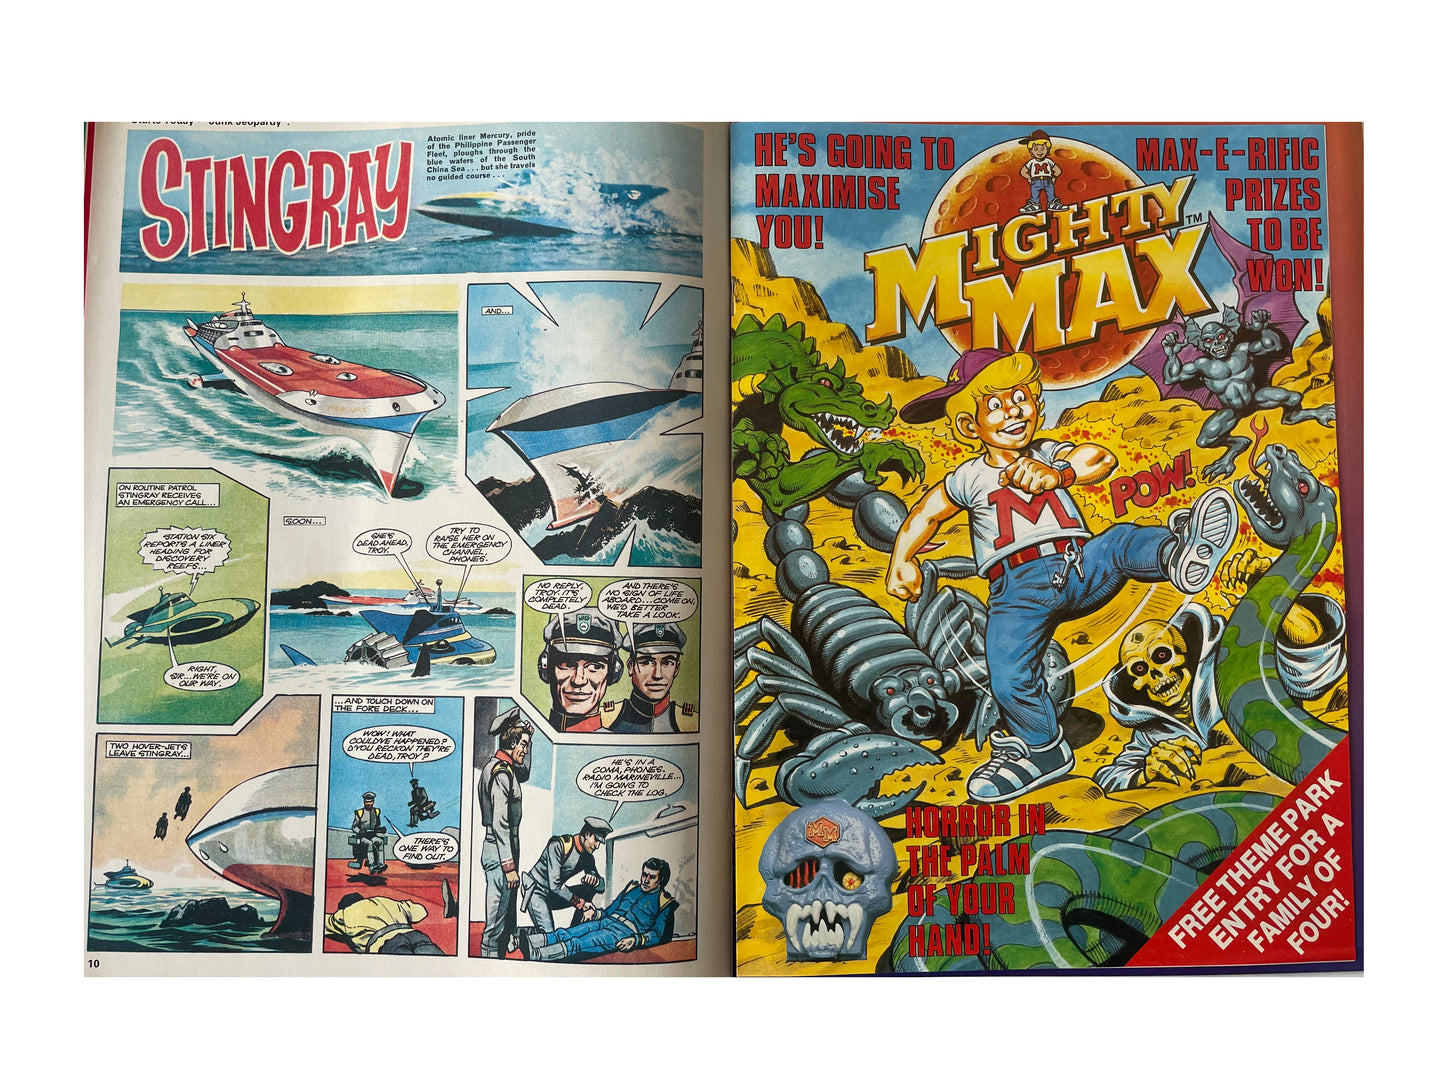 Vintage 1993 Gerry Andersons Stand By For Action... Stingray The Comic Issue No. 12 - March 13th To March 26th - Includes Free Stingray Jigsaw - Brand New Shop Stock Room Find